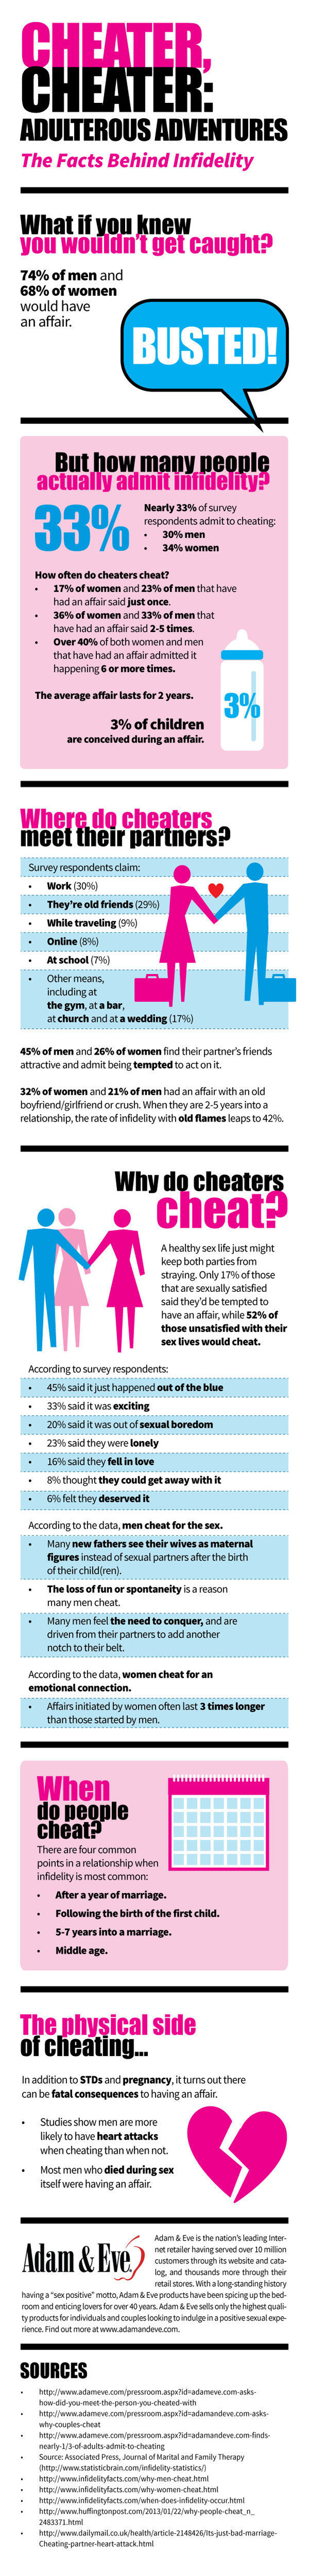 Facts behind Infidelity